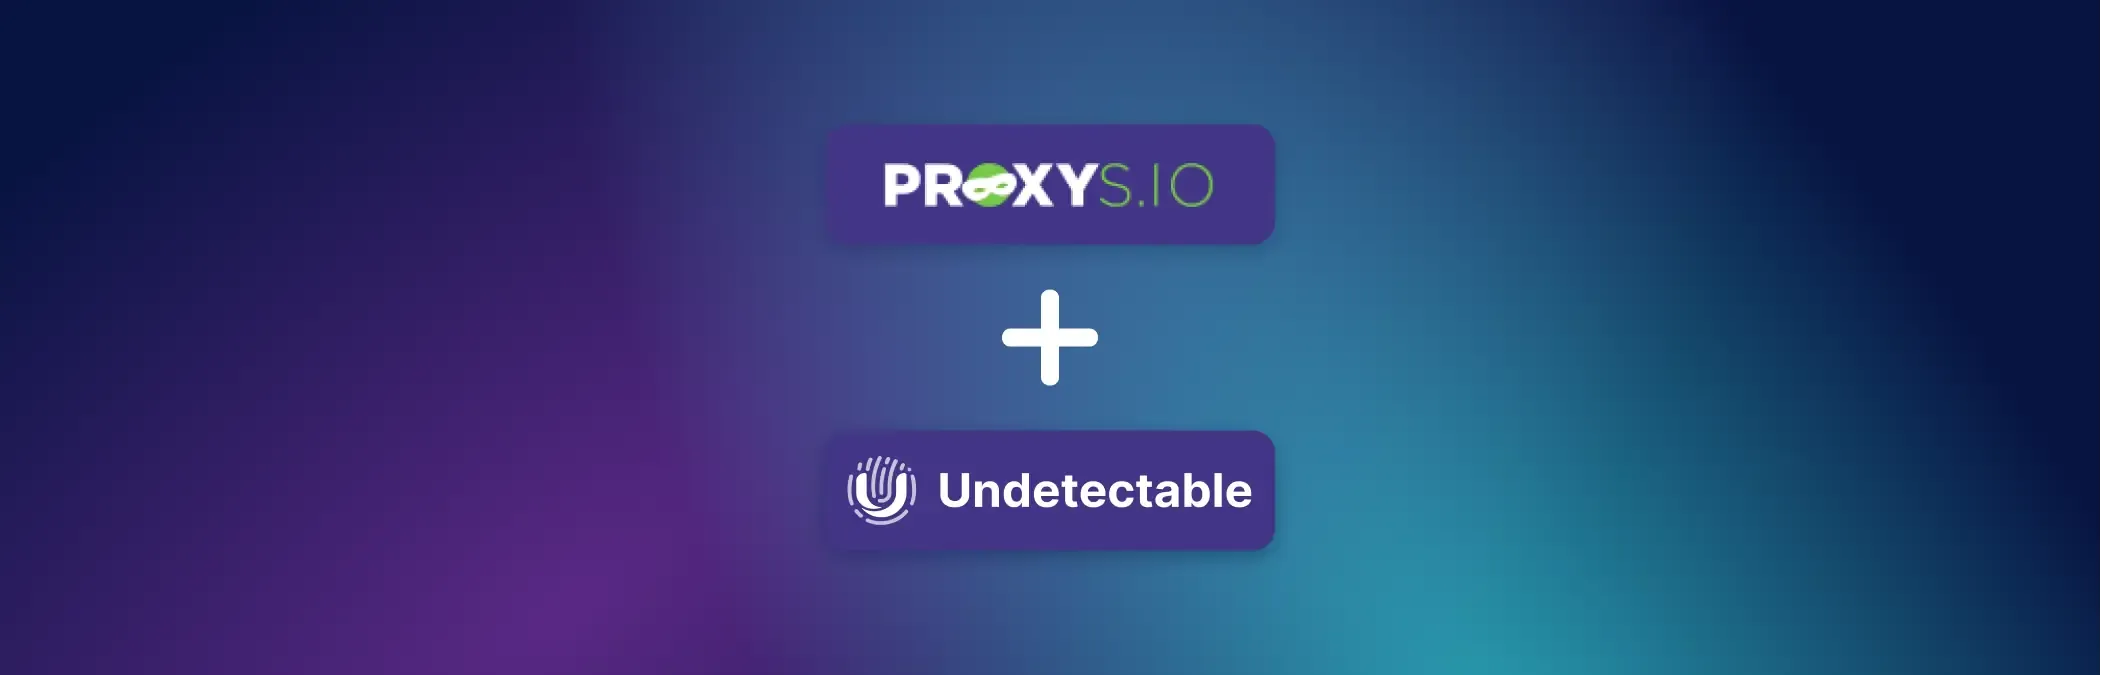 Guide to using the Proxys.io service in the Undetectable browser